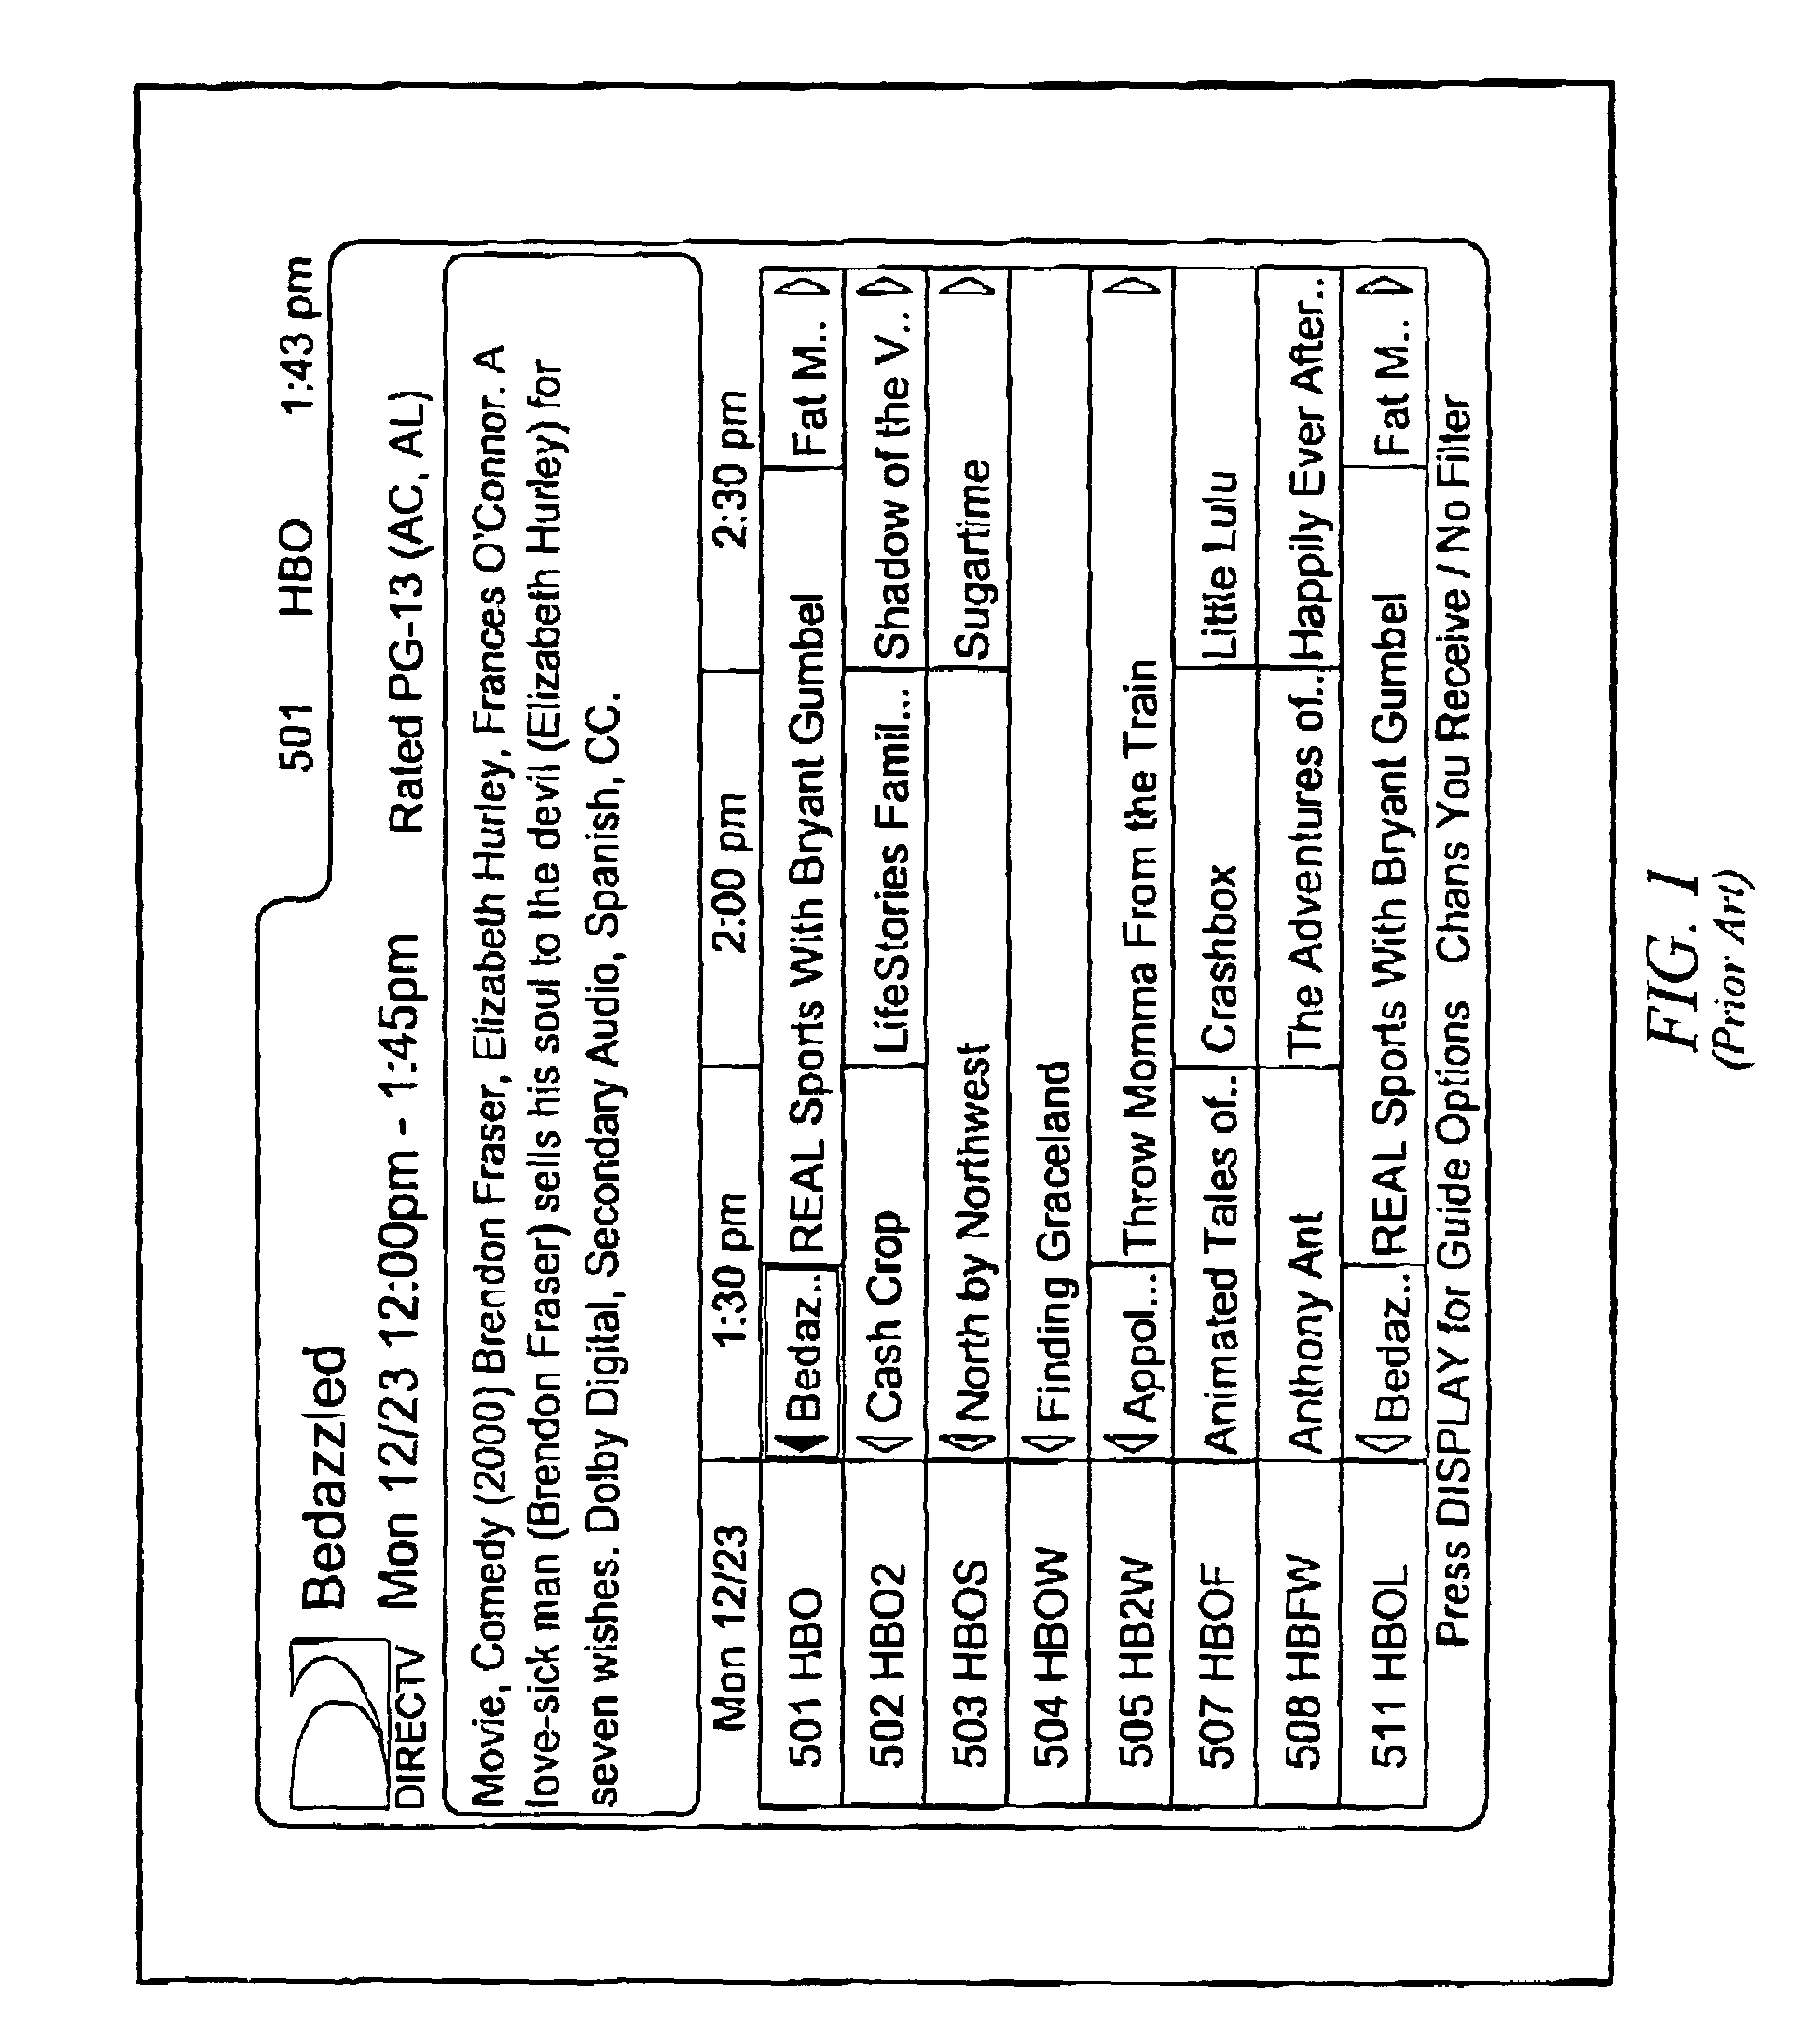 Apparatus and method for 3D electronic program guide navigation